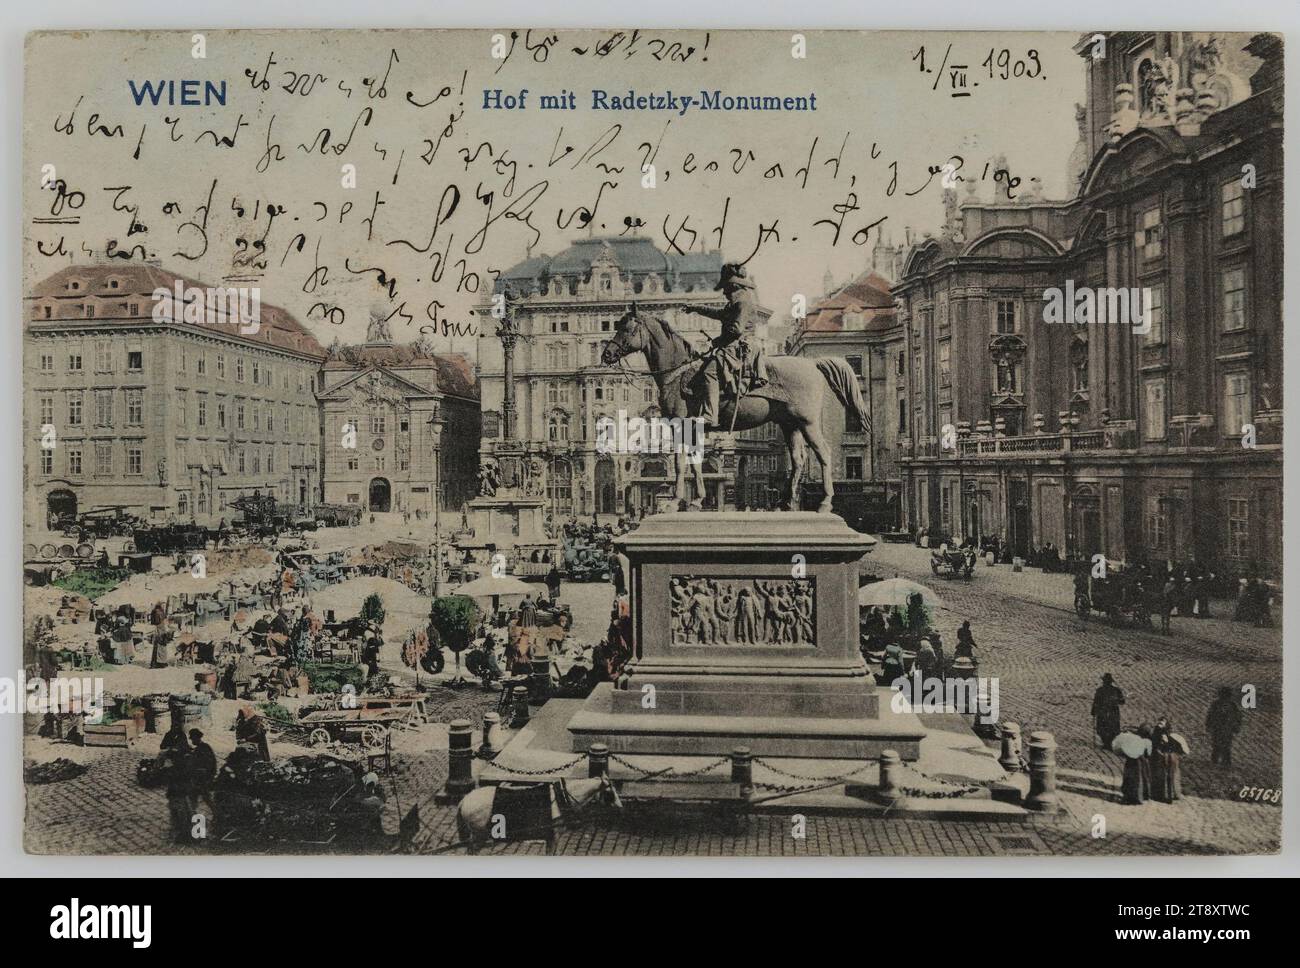 VIENNA, Hof mit Radetzky-Monument, Unknown, 1909, paperboard, hand colorised, Collotype, Height×Width: ca. 9×14 cm, Inscription, FROM, Vienna, TO, Scheibbs, ADDRESS, Hochwohlgeboren, Herrn u Frau Dir., Scheibbs, N.Ö., MESSAGE, 1.VII.1909, Text in shorthand!, Markets, Trade, Media and Communication, Postcards with transliteration, 1st District: Innere Stadt, square, place, circus, etc., with people, sculpture, church (exterior), monument, statue, handwriting, written text, Am Hof, Radetzkydenkmal (1), equestrian statue, Kirche am Hof Stock Photo